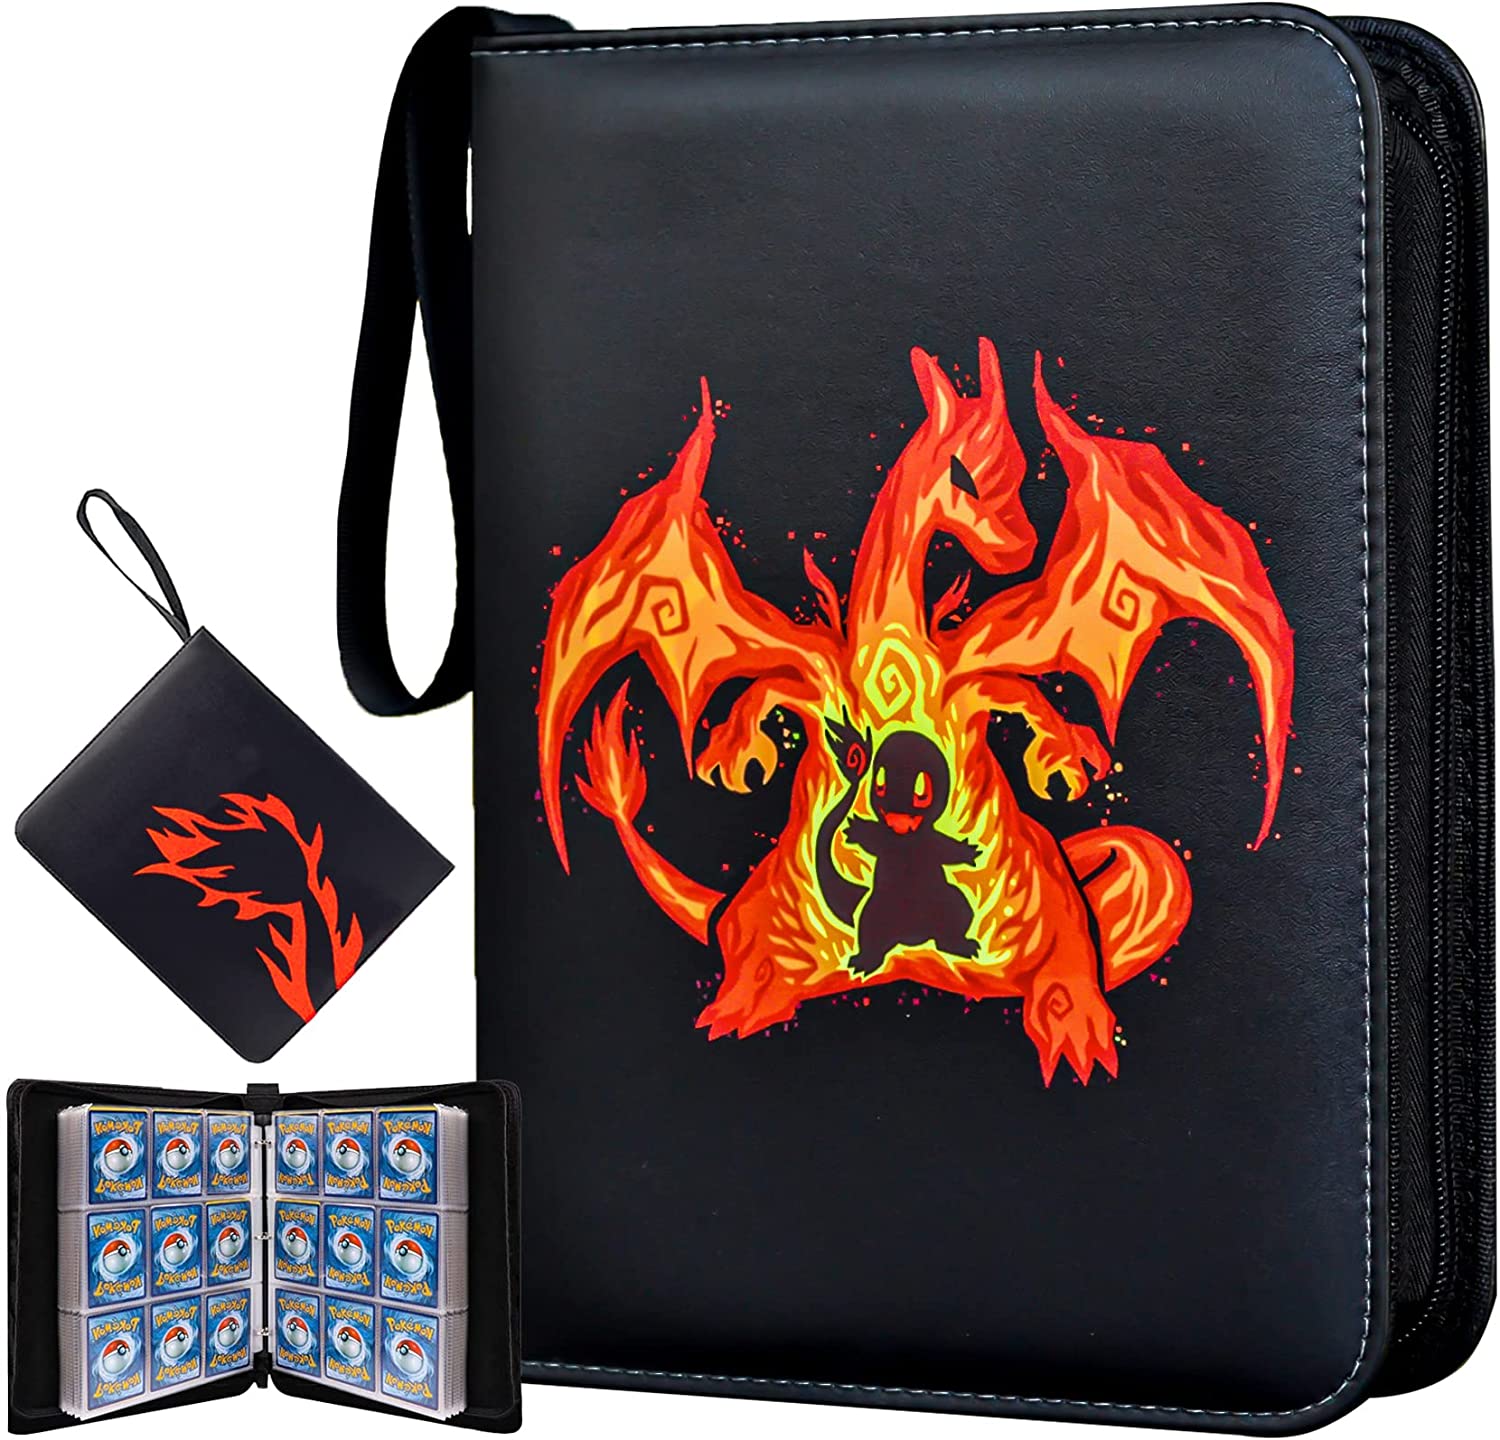 Trading Card Binder Display Storage Carrying Case-Fire Dragon Card Binder for Pokemon Cards,9-Pockets fits up to 900 Cards Collector Album Holder Book with 50 Removable Sleeves 